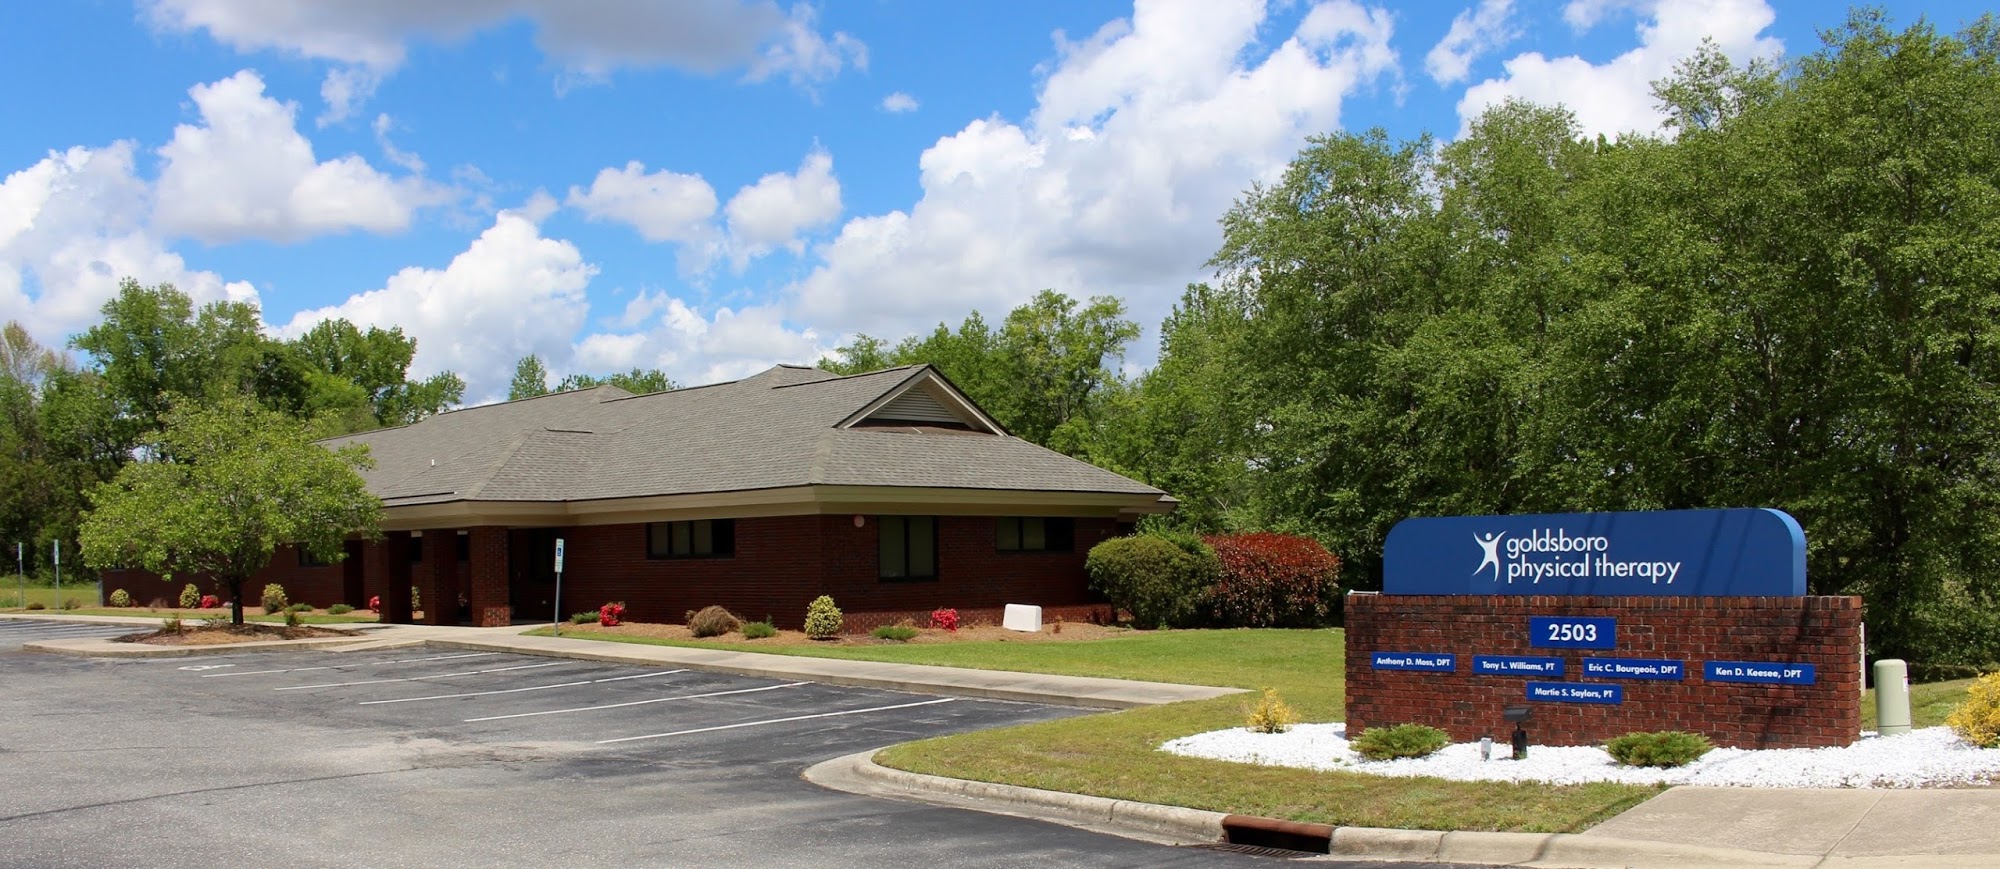 Goldsboro Physical Therapy and Wellness